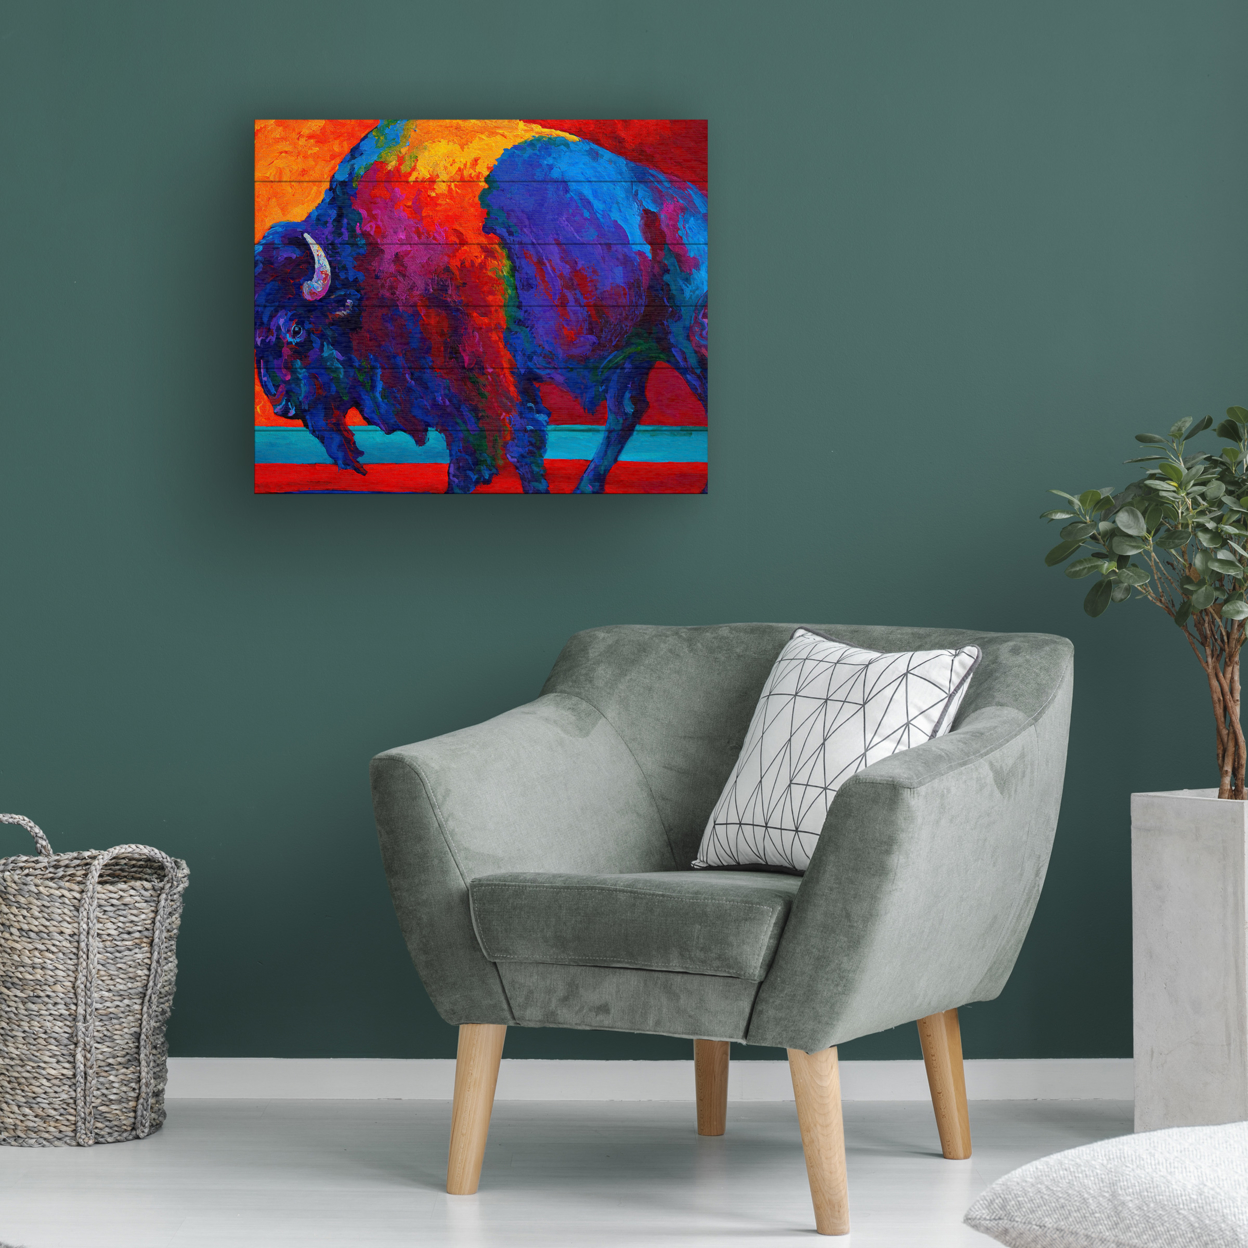 Wooden Slat Art 18 X 22 Inches Titled Abstract Bison Ready To Hang Home Decor Picture